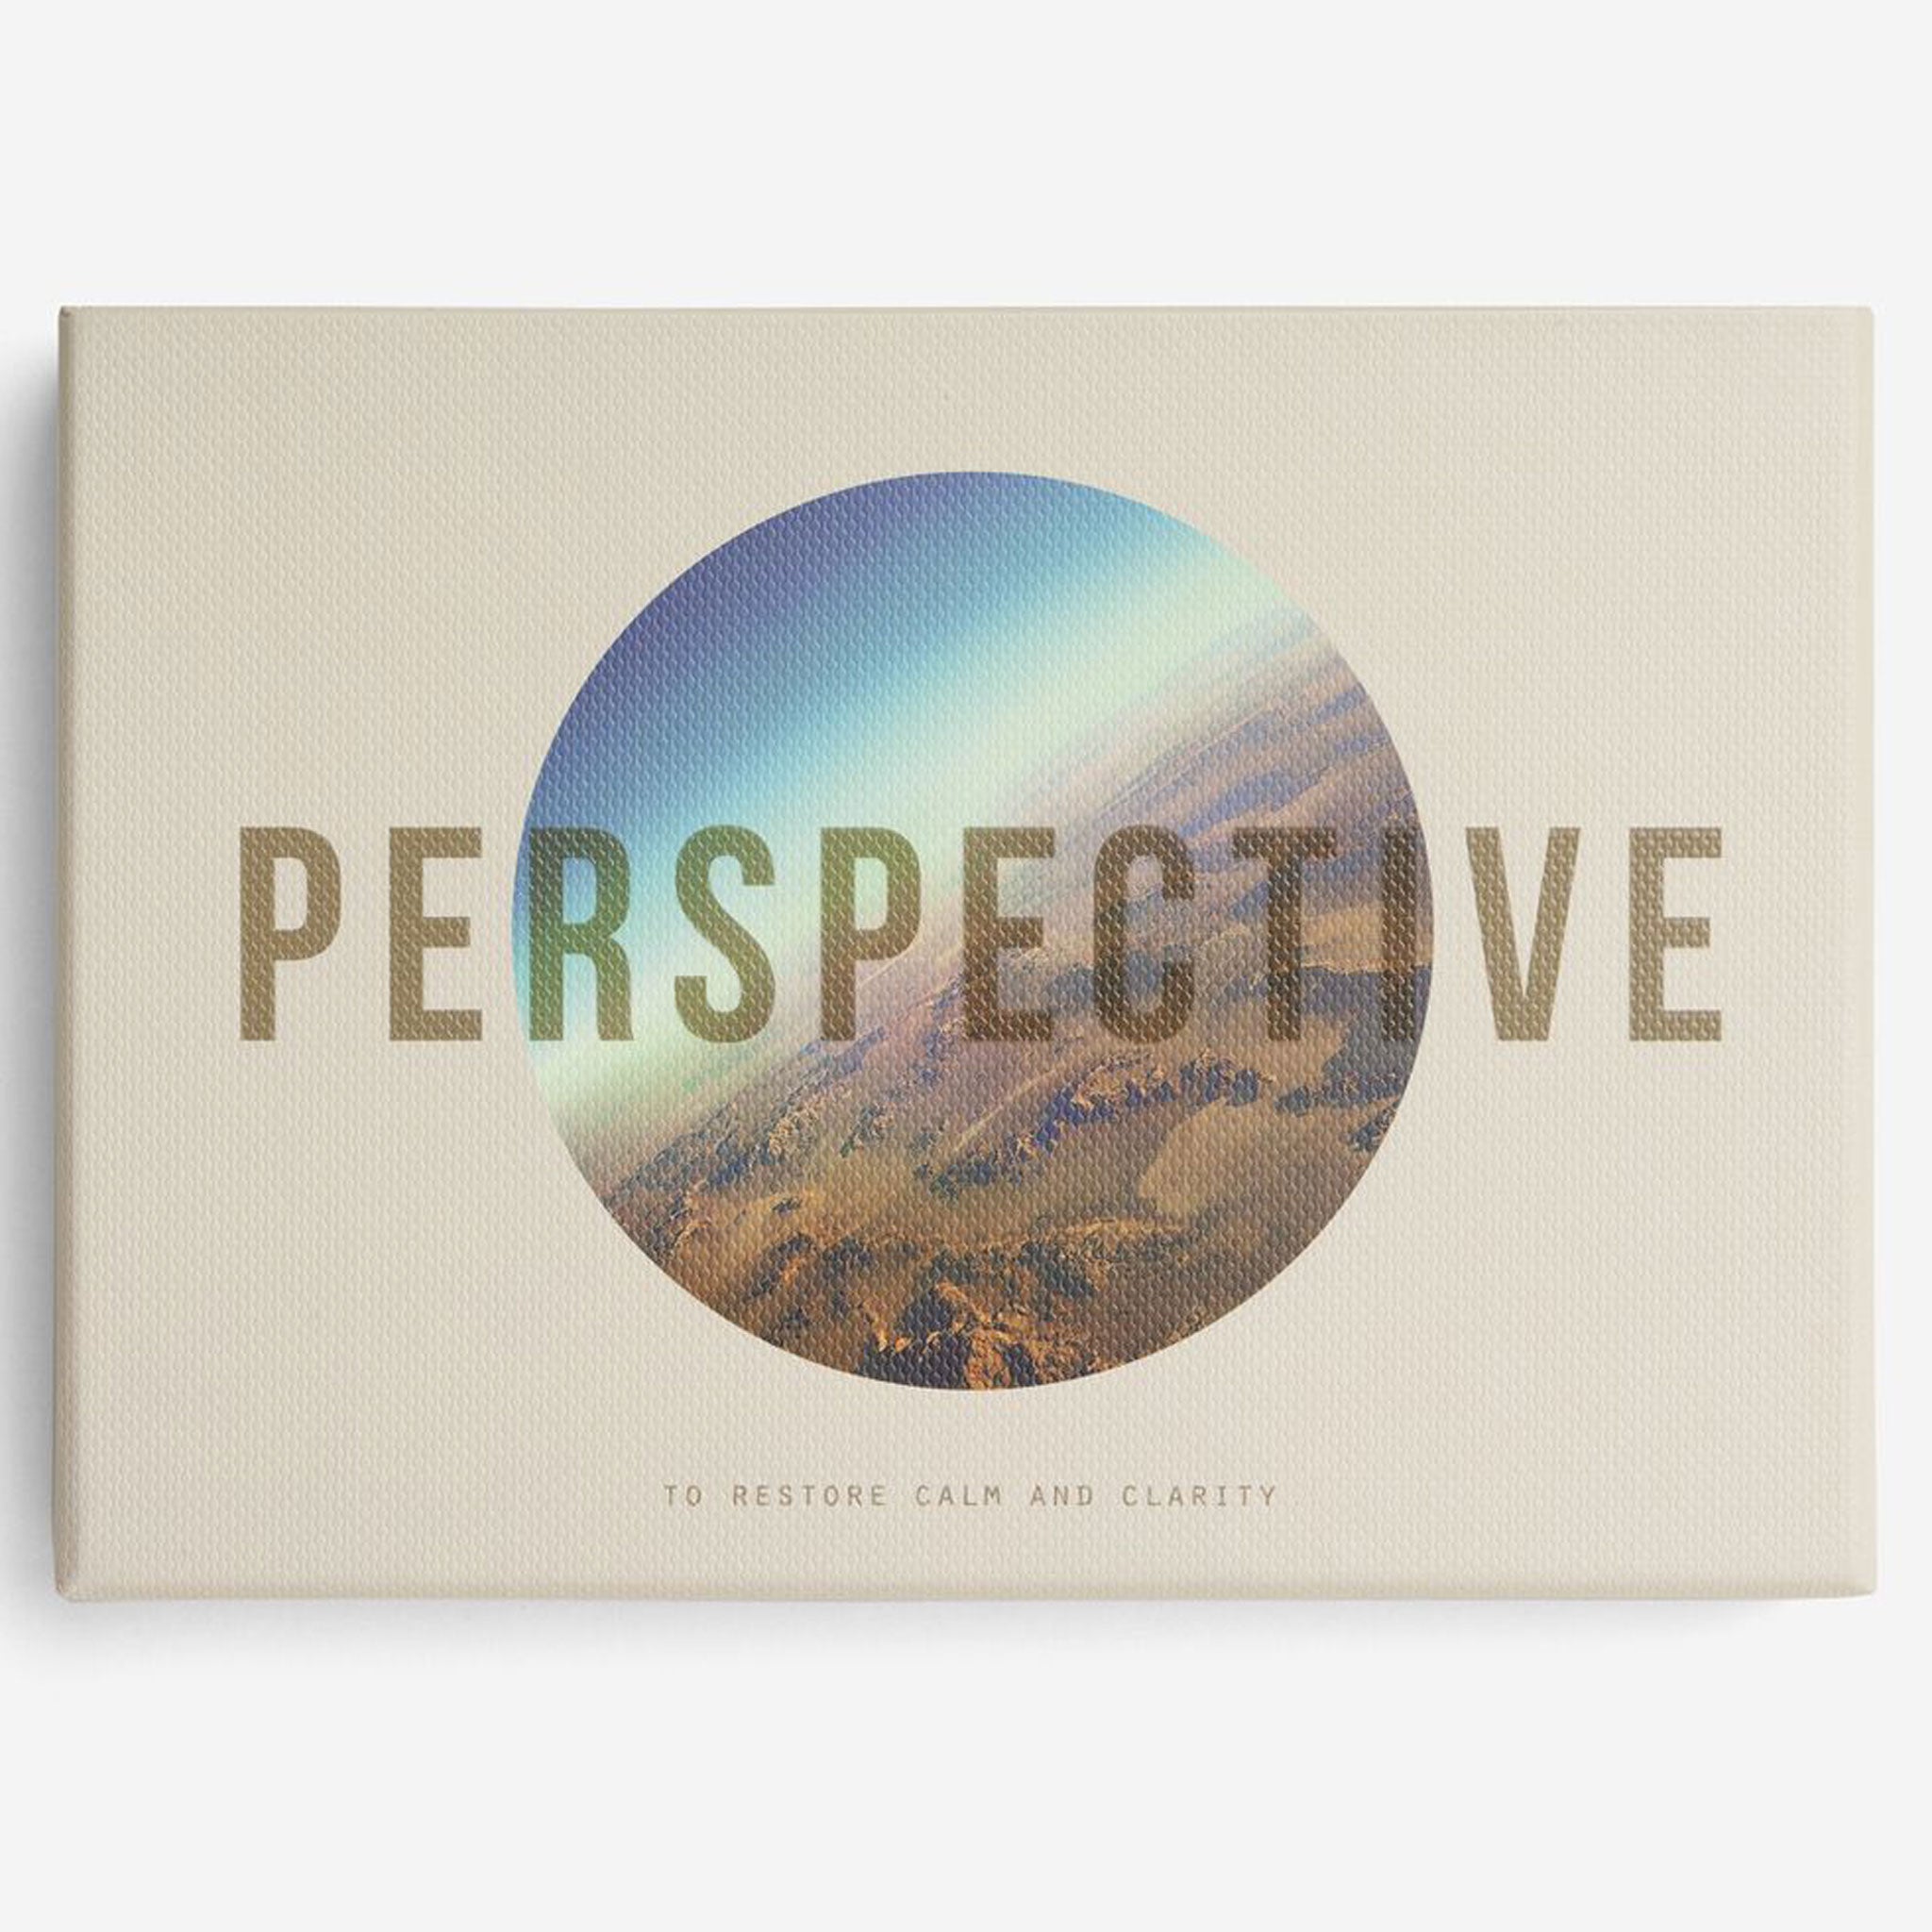 CARDS FOR PERSPECTIVE | ENSEMBLE DE 20 CARTES | Édition anglaise | The School of Life